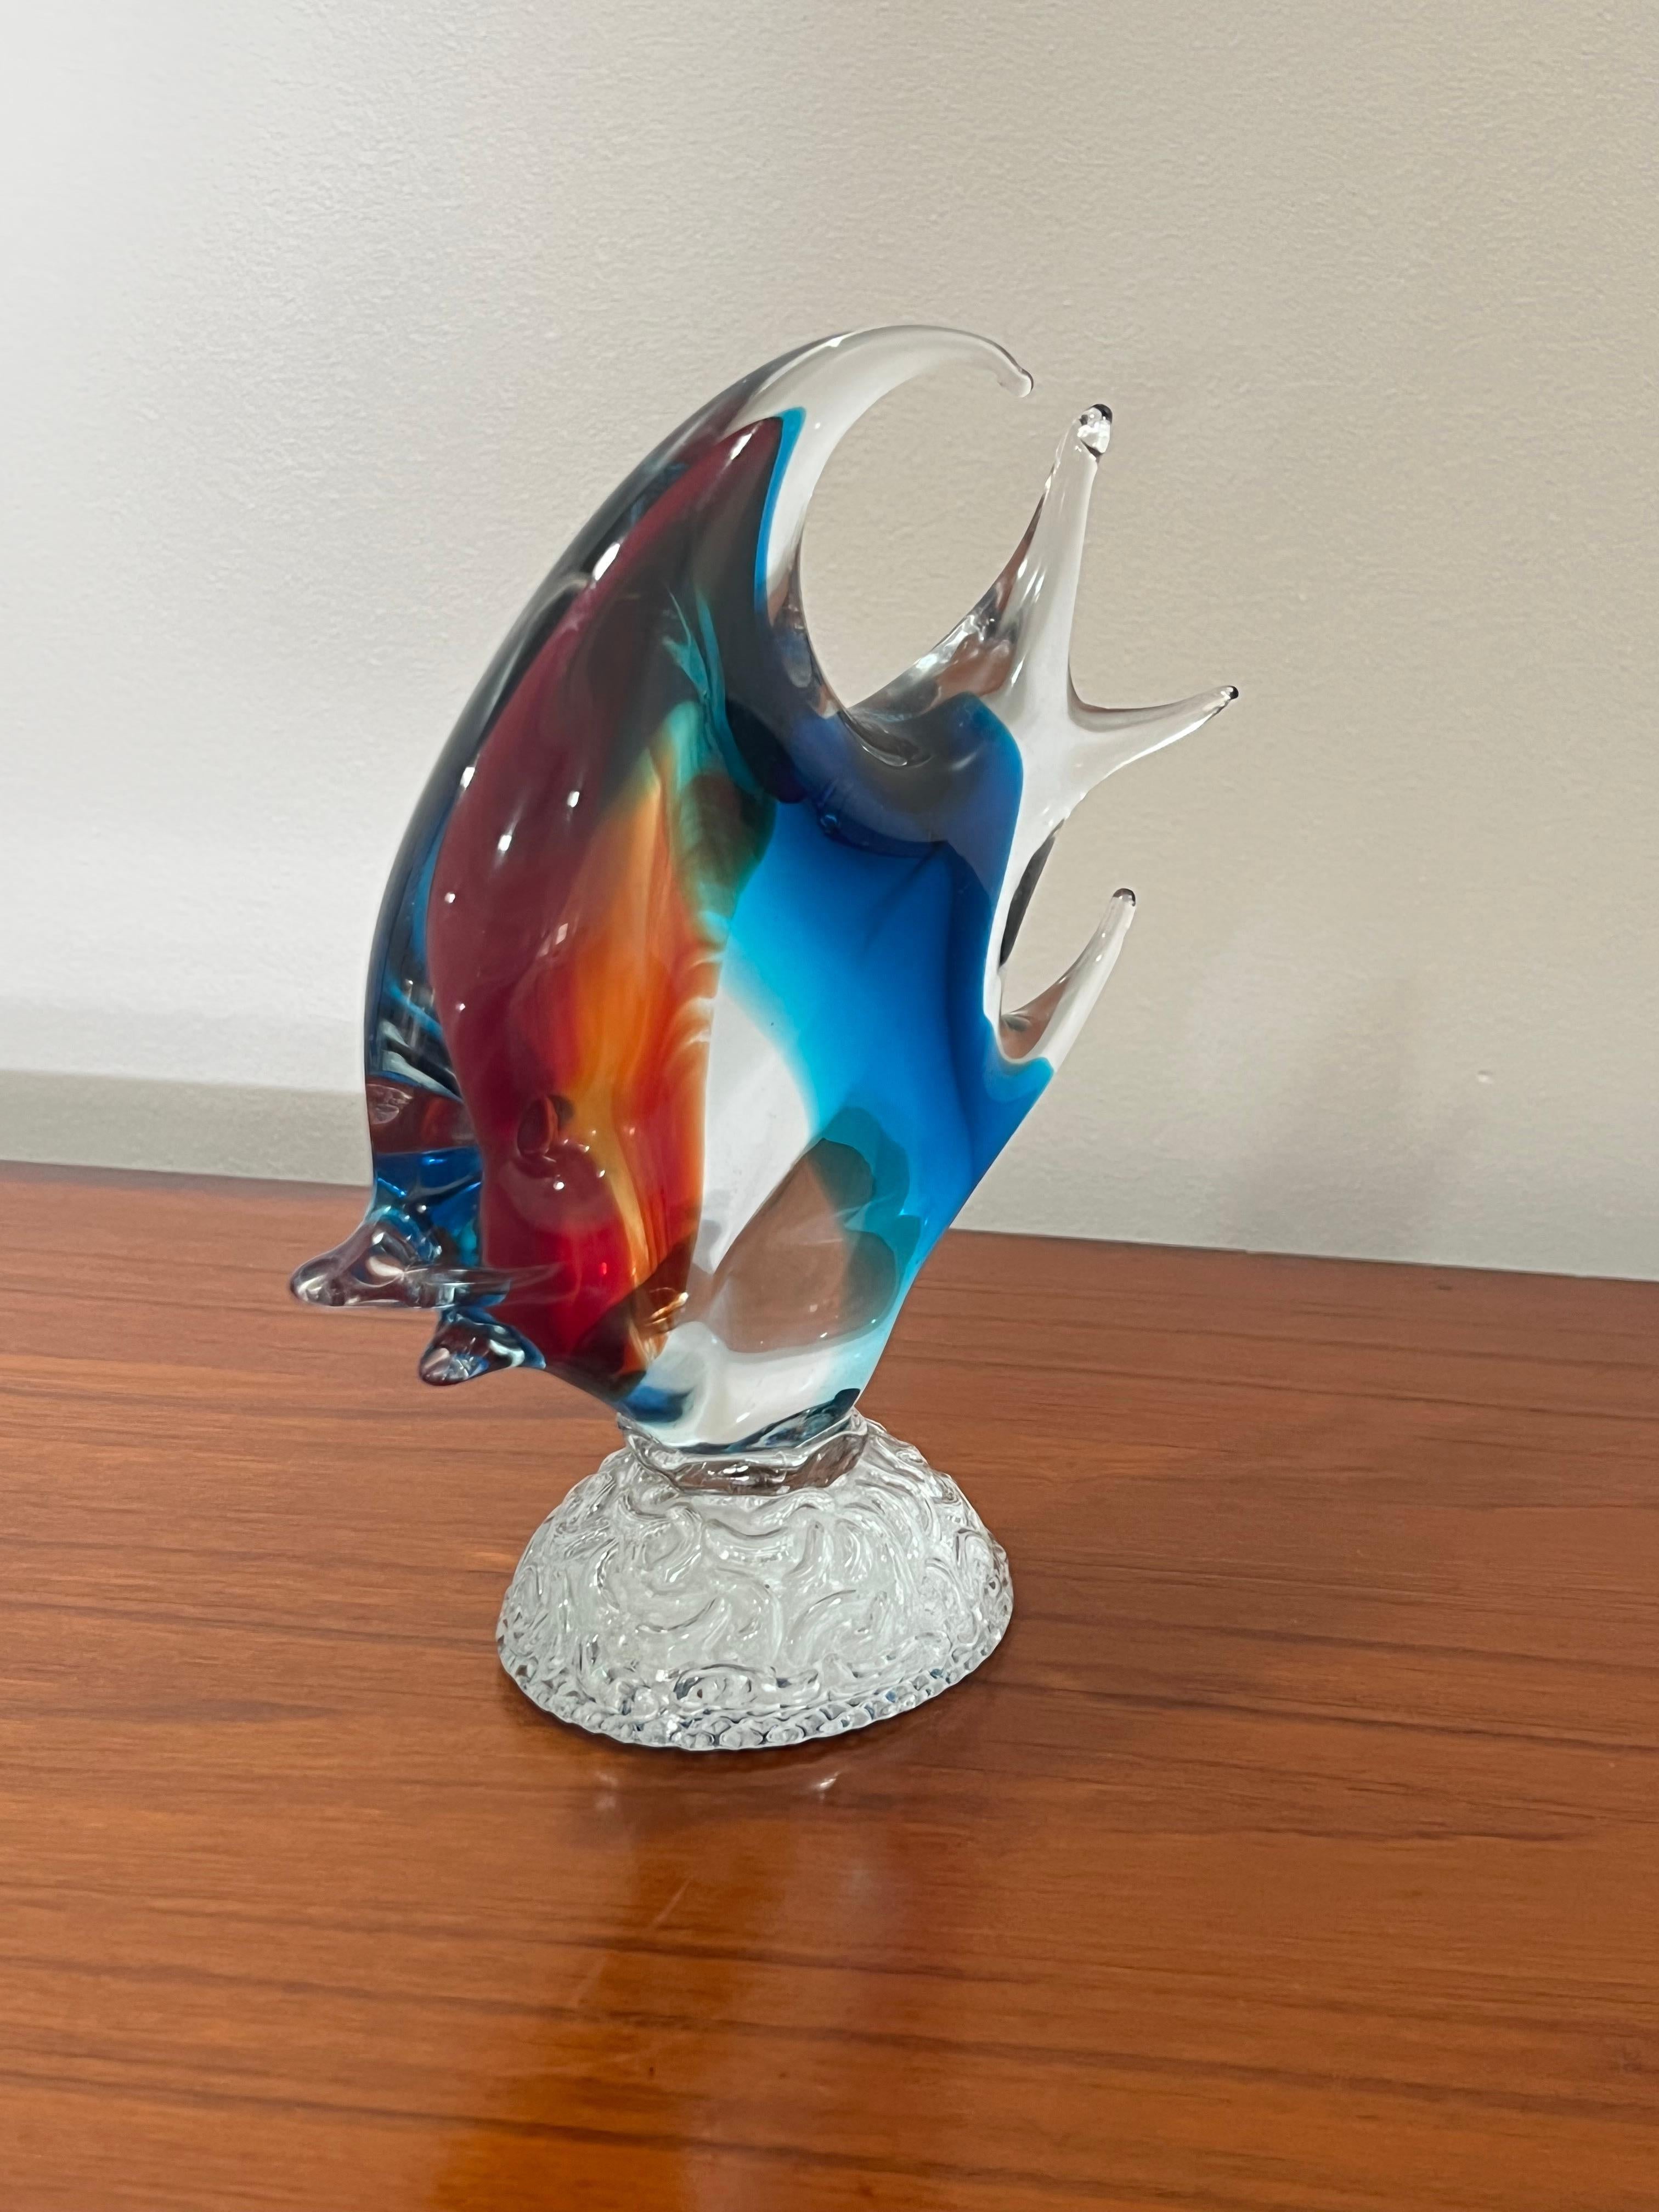 Stunning Murano glass fish sculpture in red orange and blue.
From Murano island Italy, 1960s.